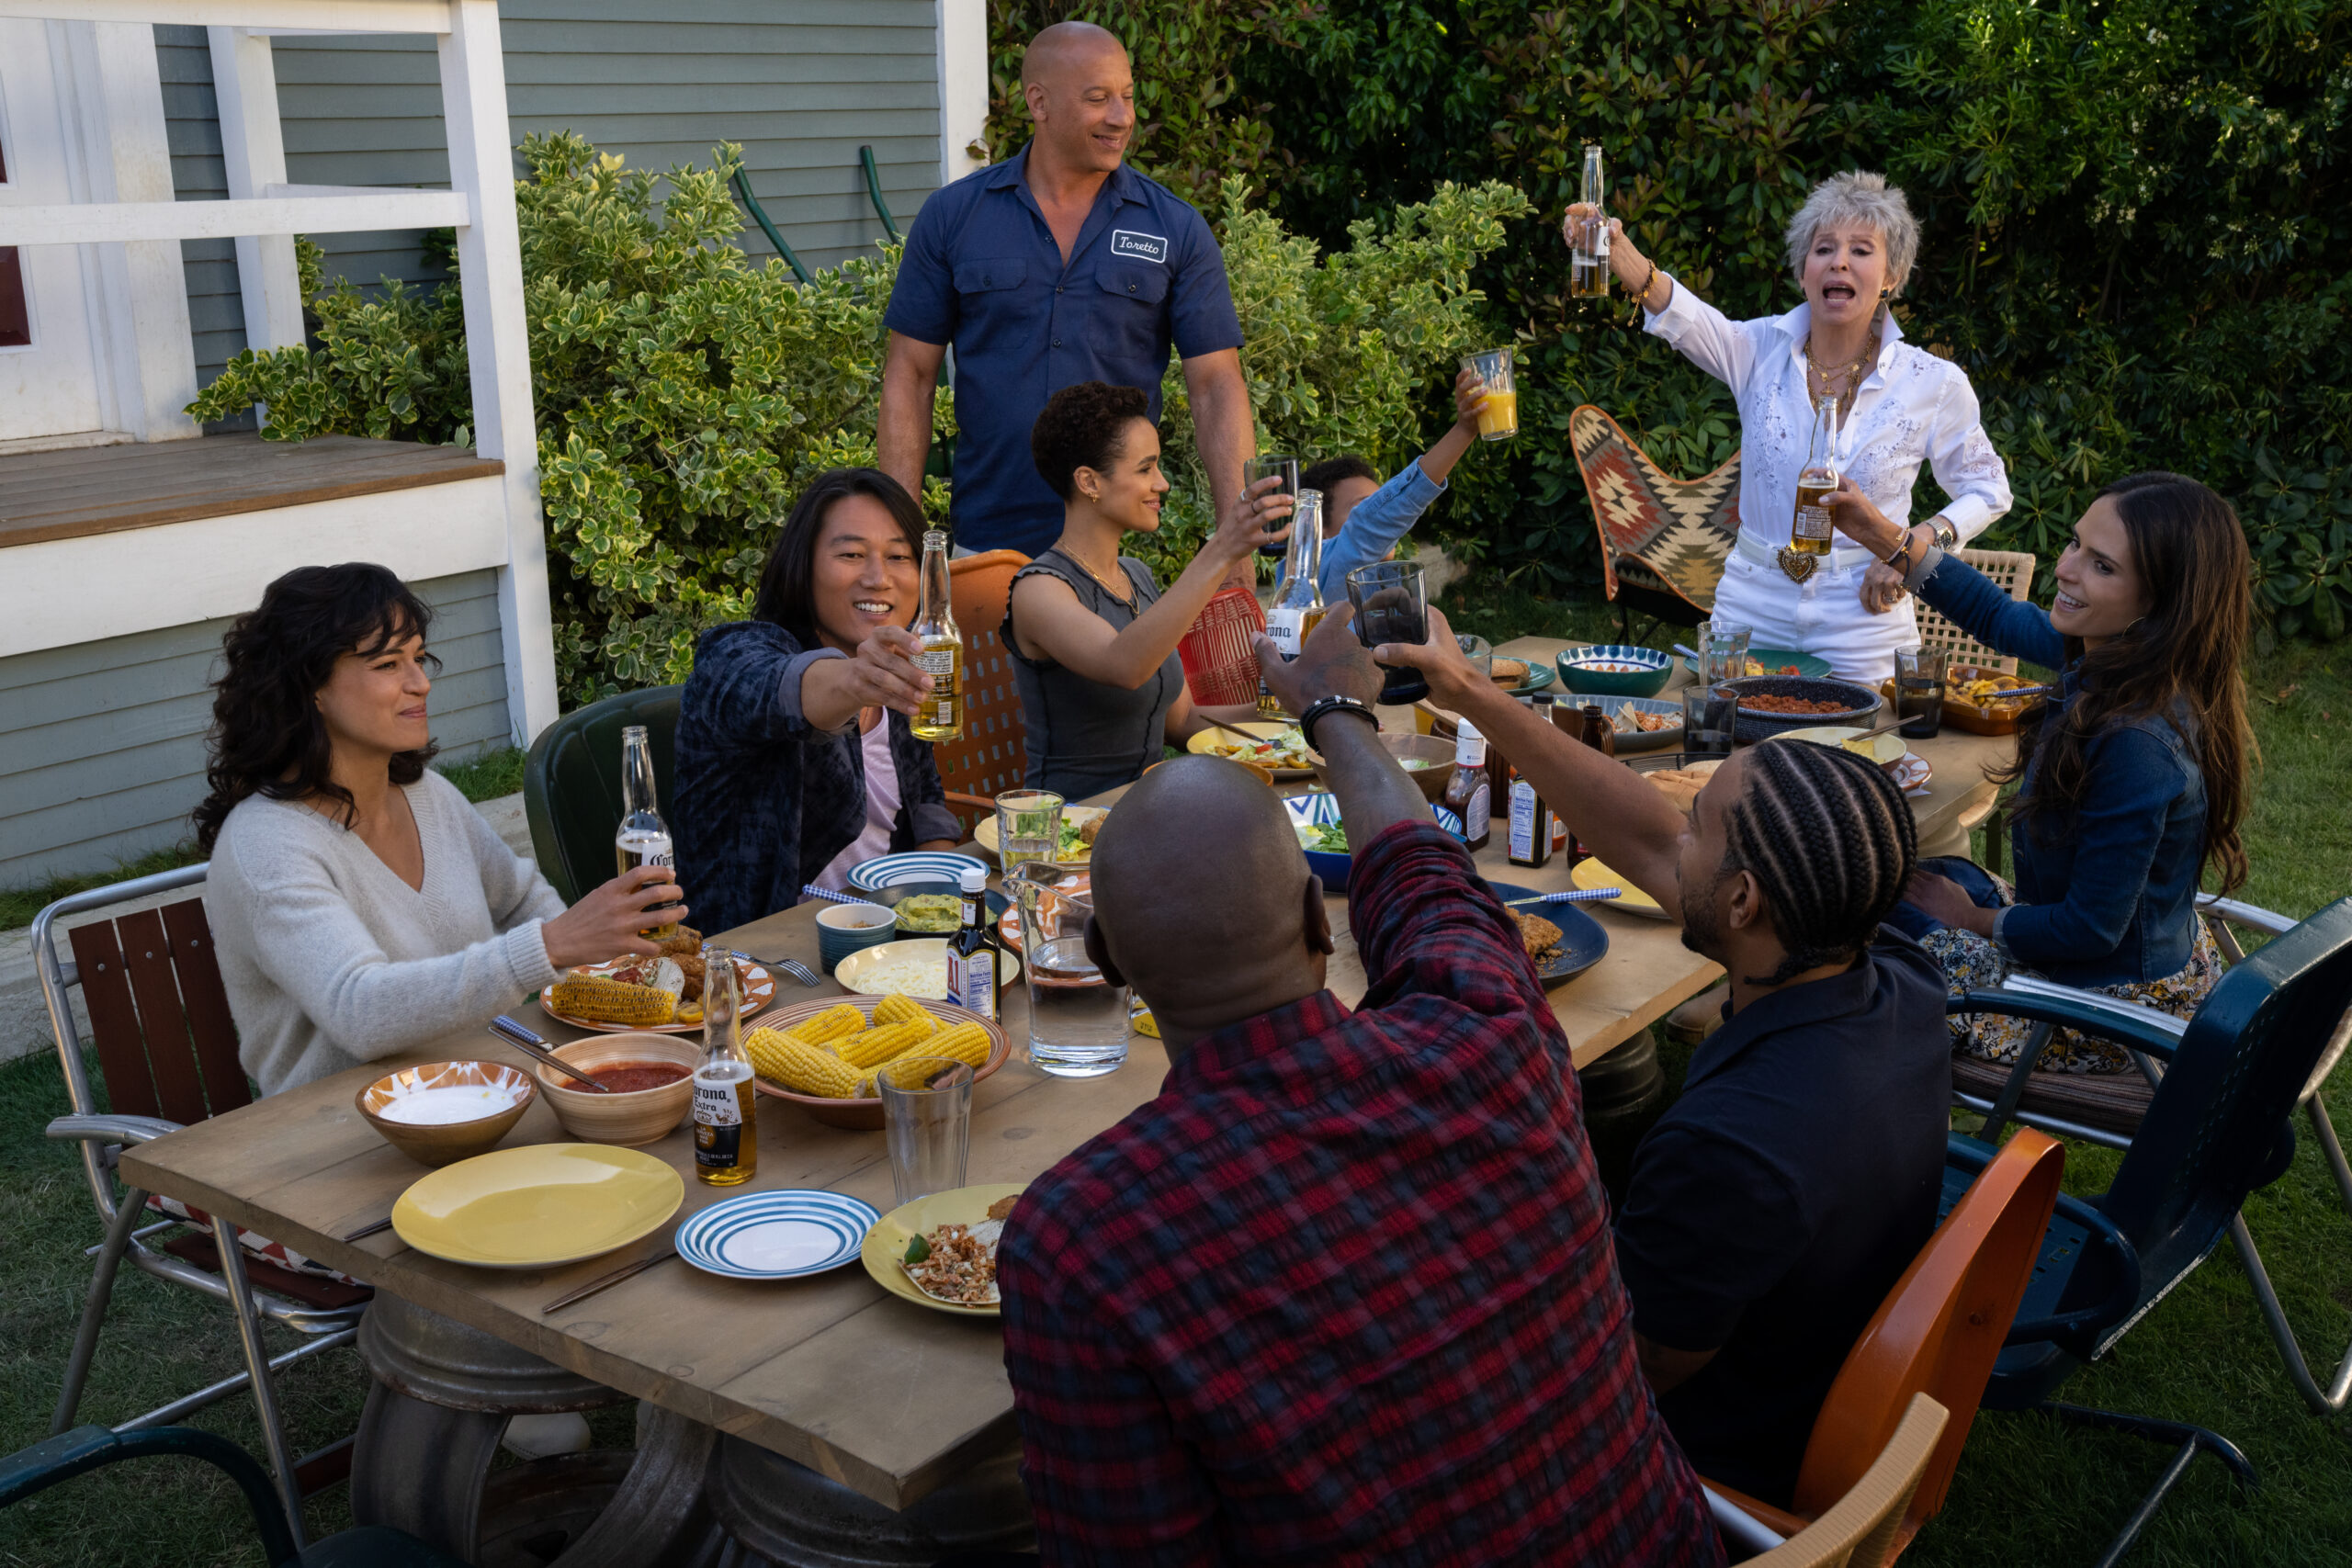 (clockwise, from left) Letty (Michelle Rodriguez), Han (Sung Kang), Ramsey (Nathalie Emmanuel), Dom (Vin Diesel), Little Brian (Leo Abelo Perry), Abuelita (Rita Moreno), Mia (Jordana Brewster), Tej (Chris ‘Ludacris’ Bridges, back to camera) and Roman (Tyrese Gibson, back to camera) in Fast X, directed by Louis Leterrier.